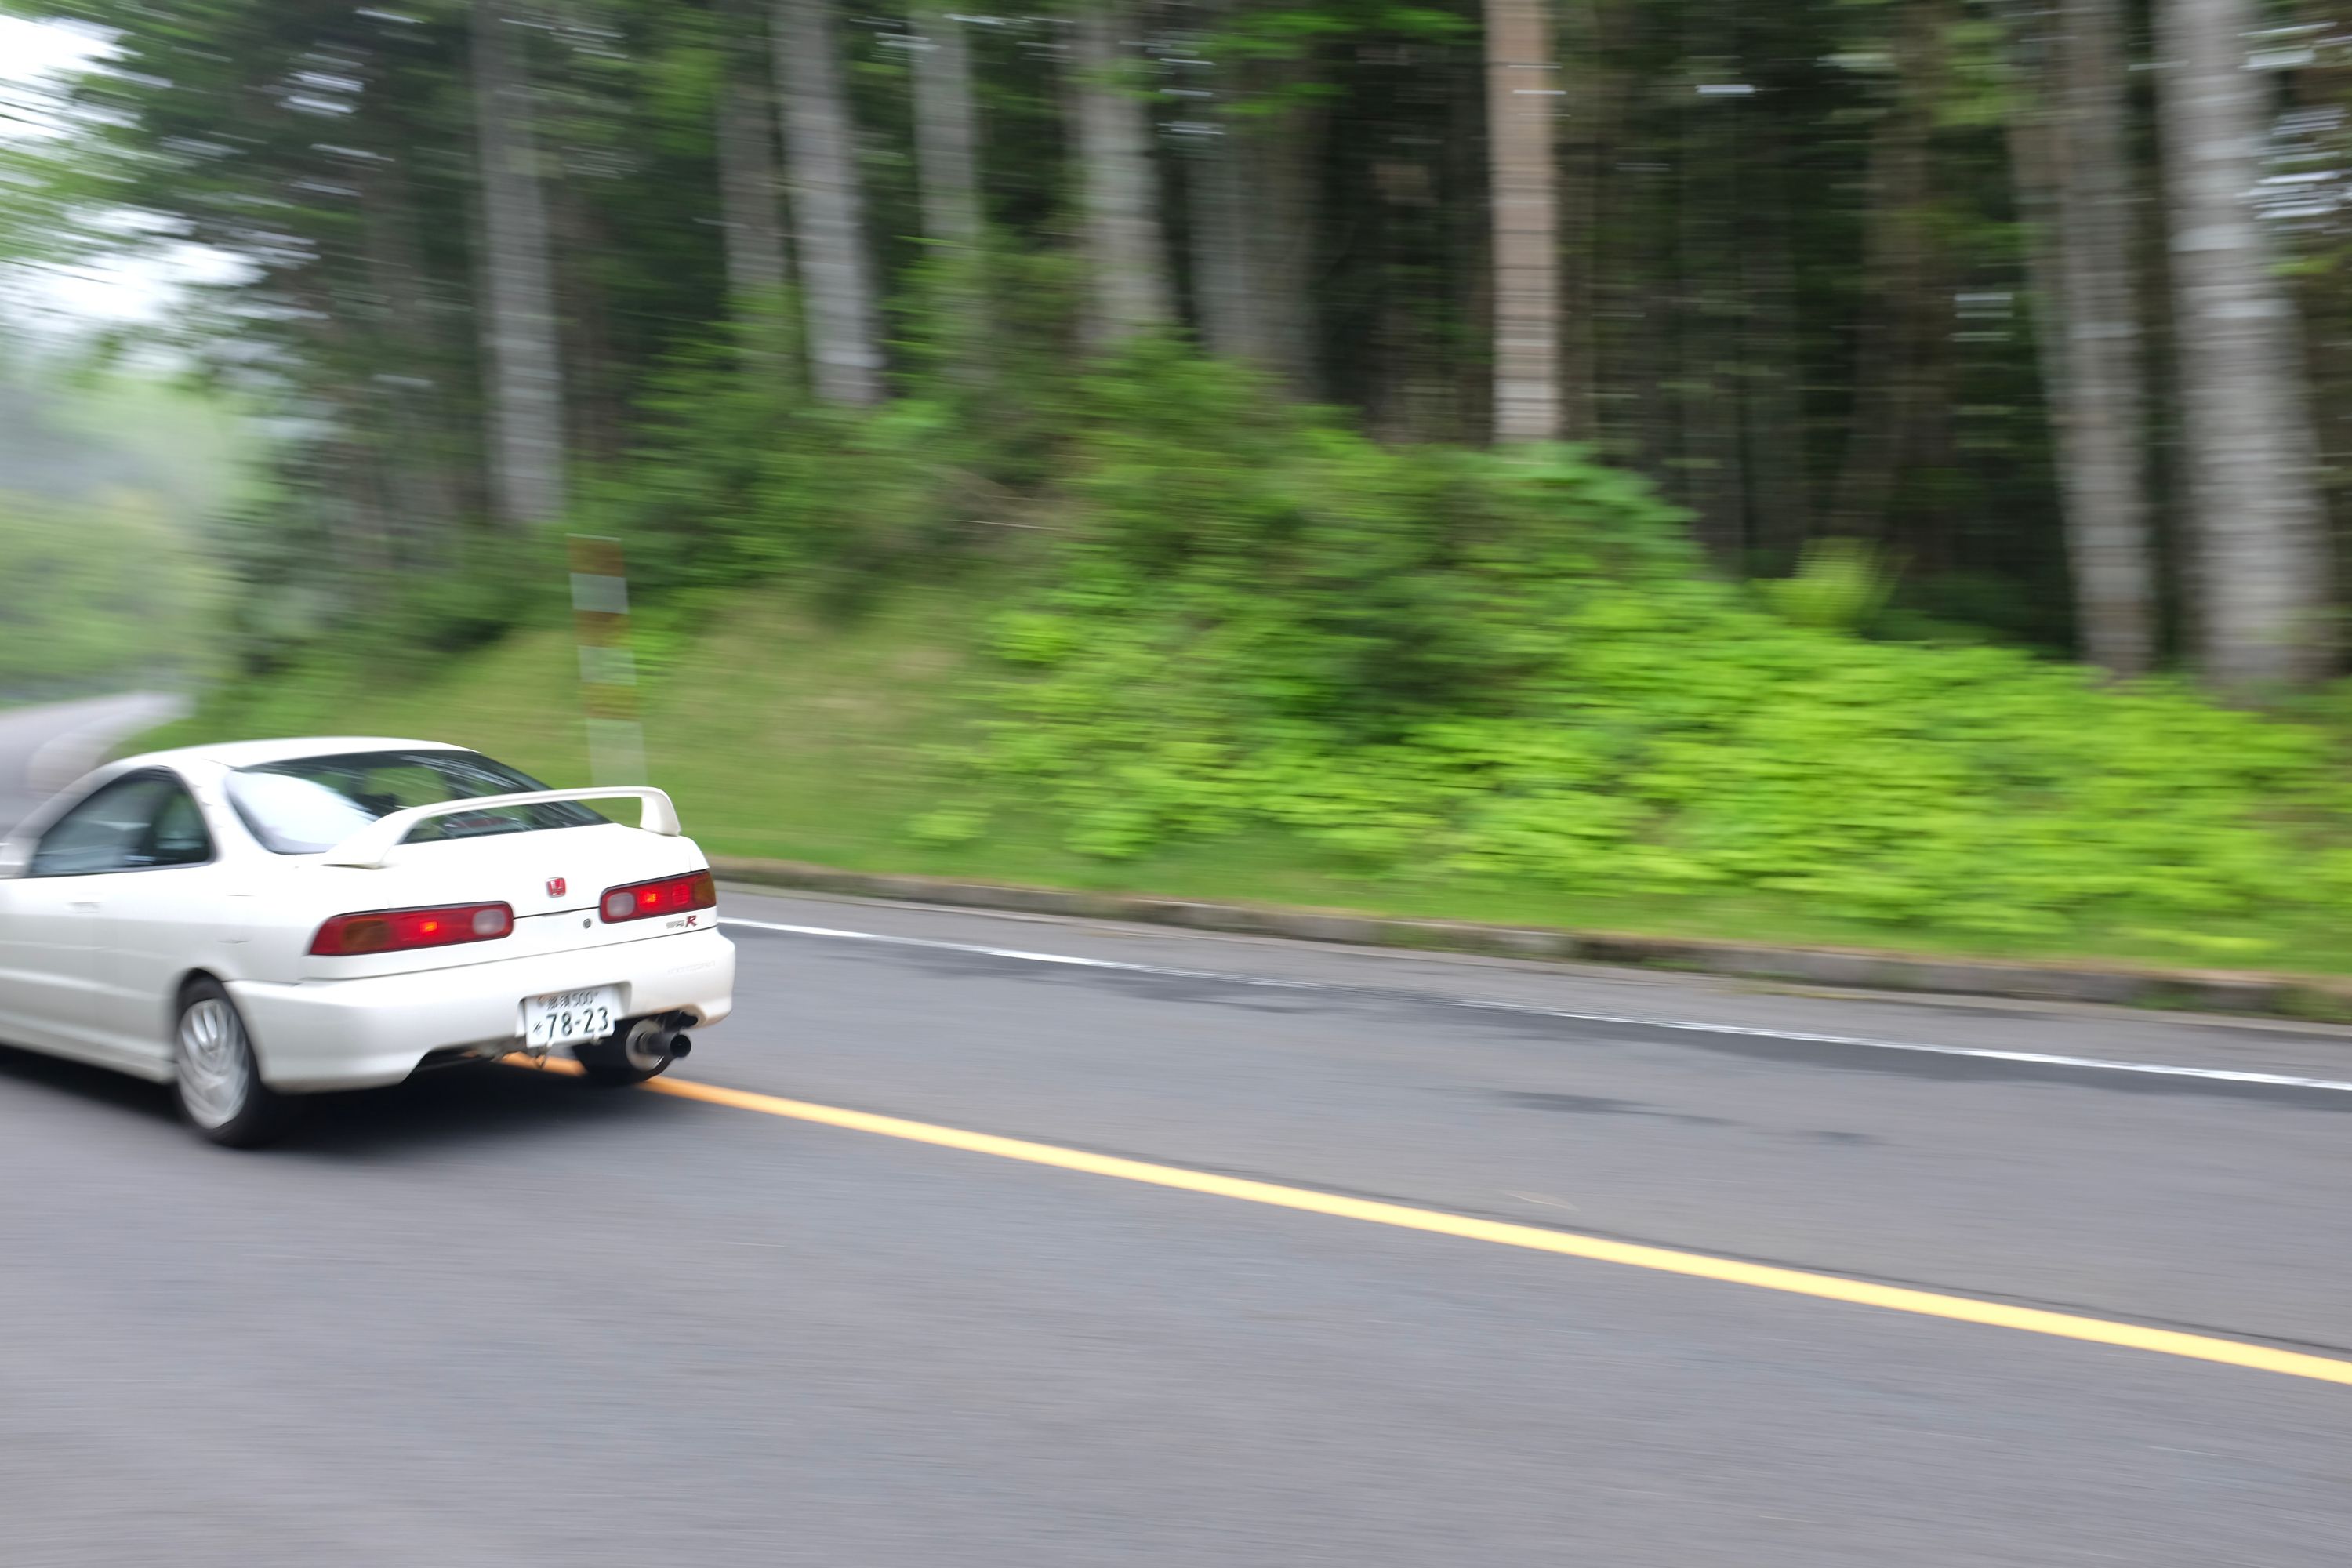 A white Honda Integra drives at high speed along a road in the forest.